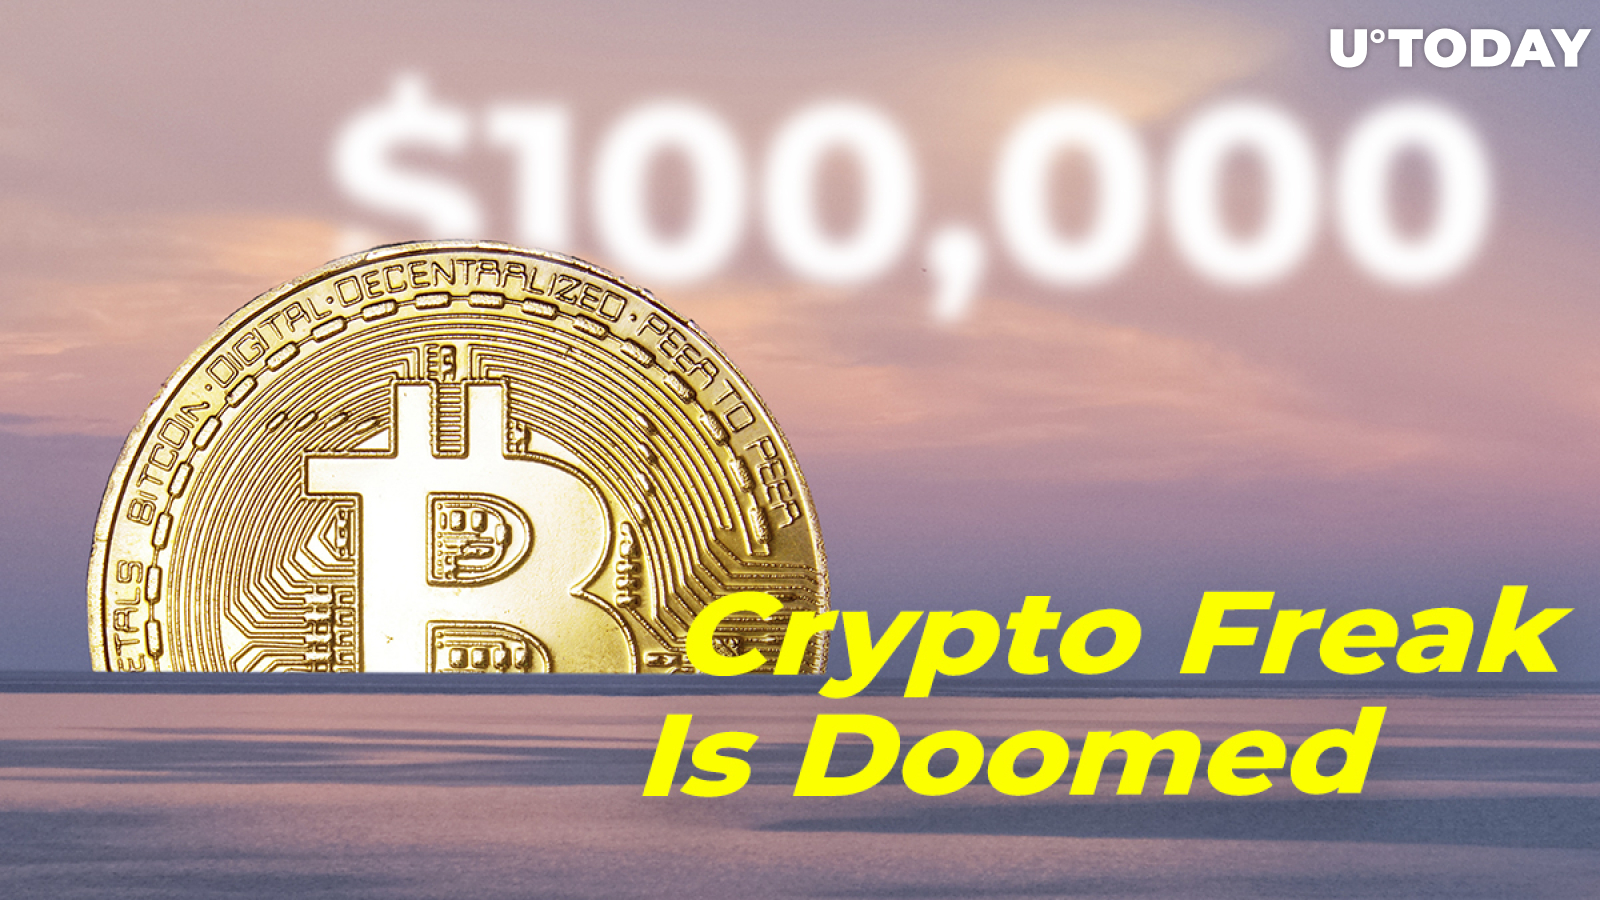 Crypto Freak John McAfee Is Doomed – Anthony Pompliano: Bitcoin Likely to Rise to $100,000 by Late 2021